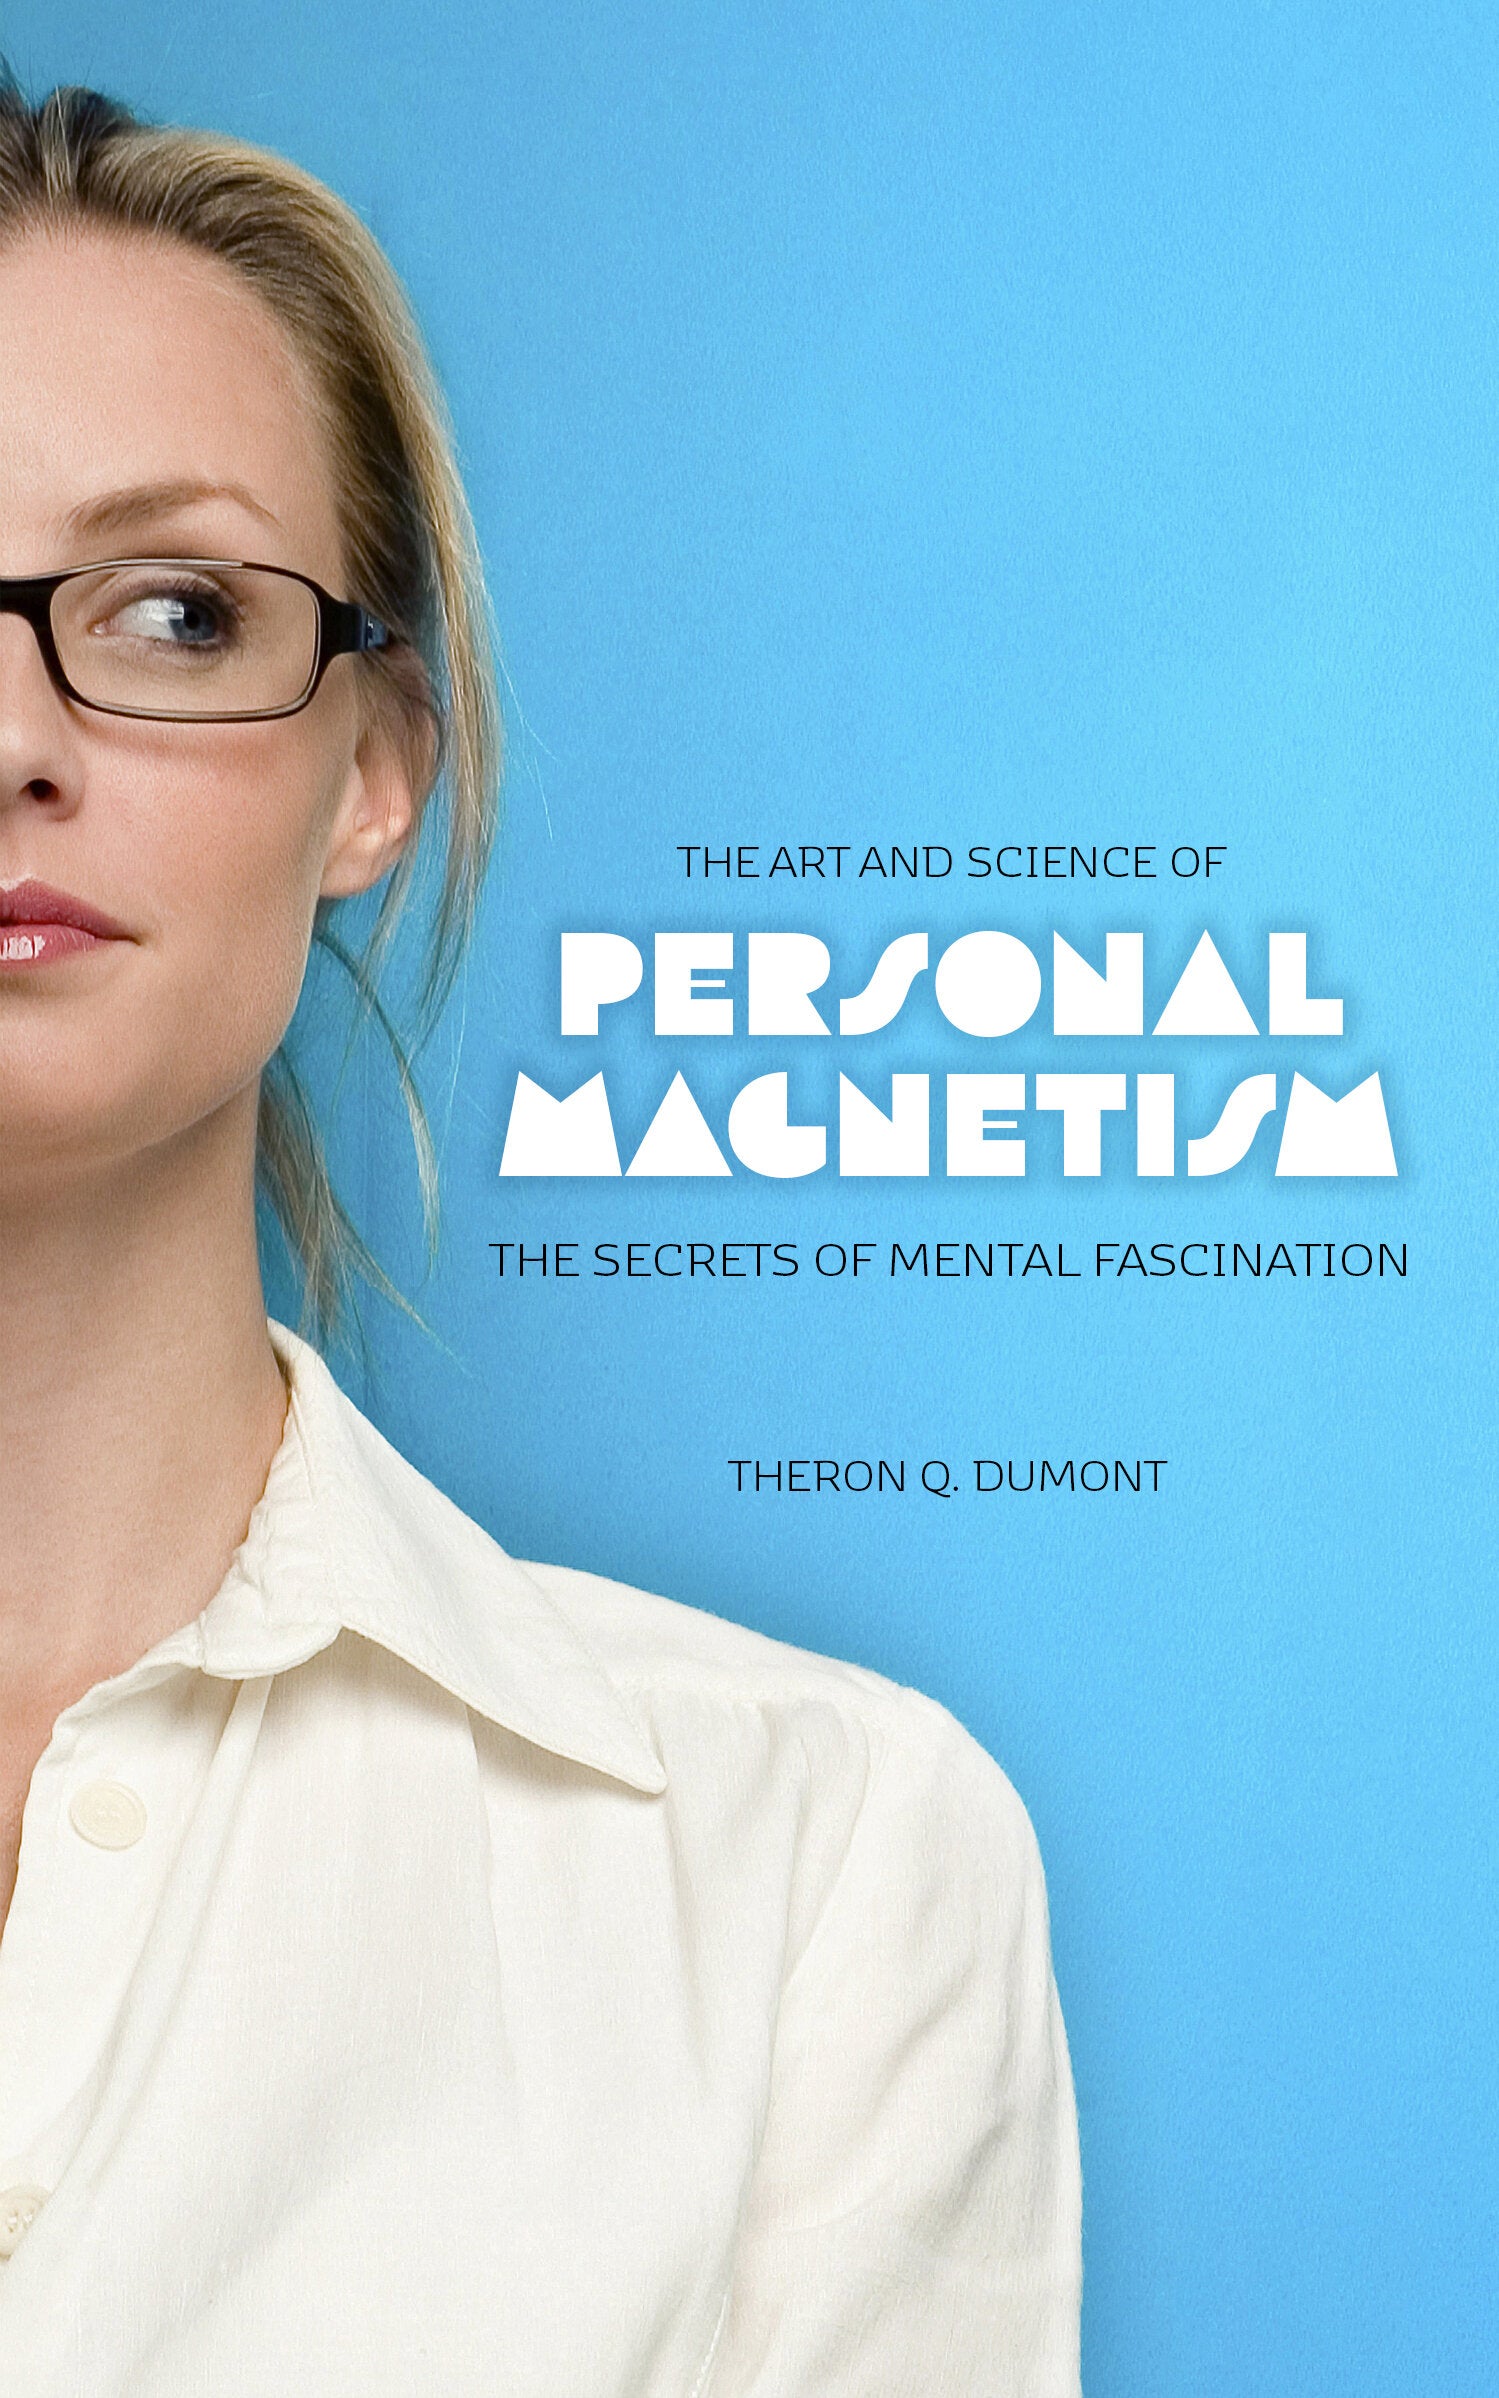 The Art & Science of Personal Magnetism